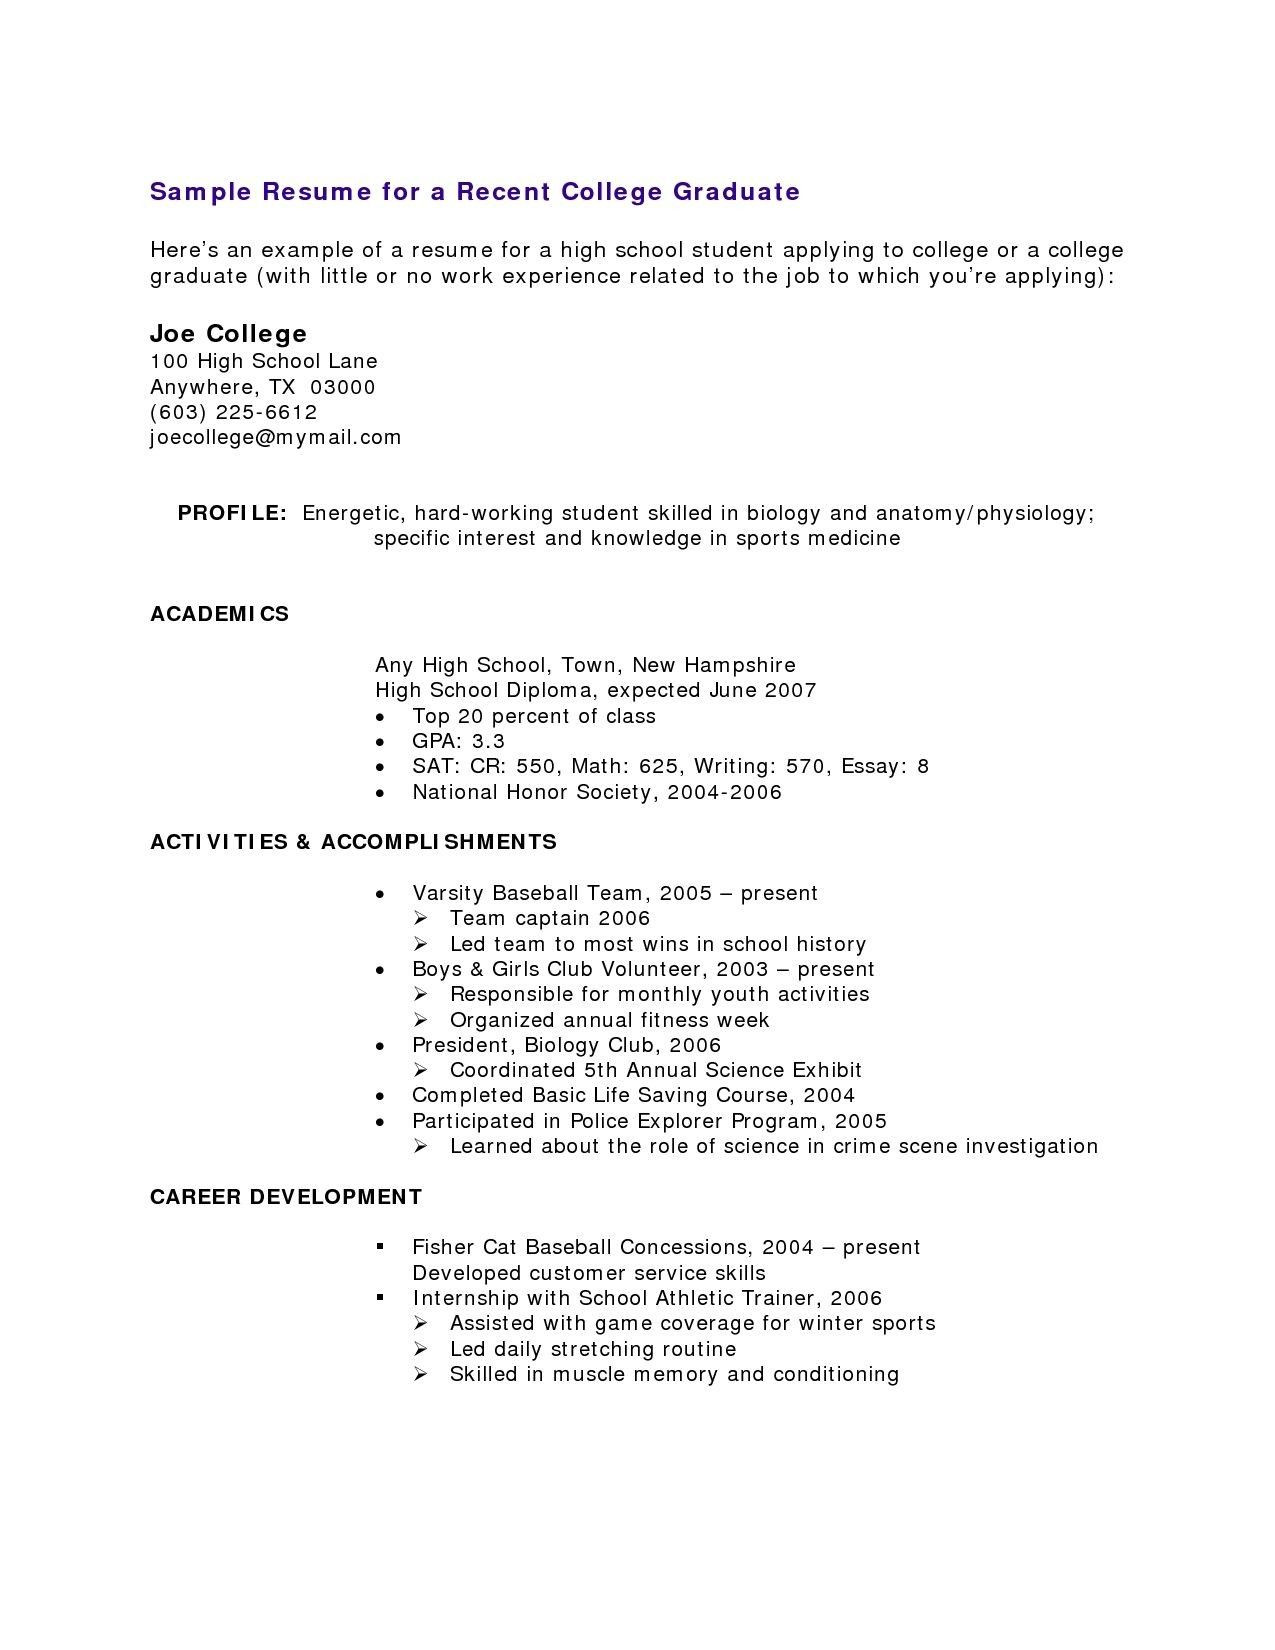 Sample Resume for Highschool Students with Little Work Experience High School Student Resume with No Work Experience Resume High …